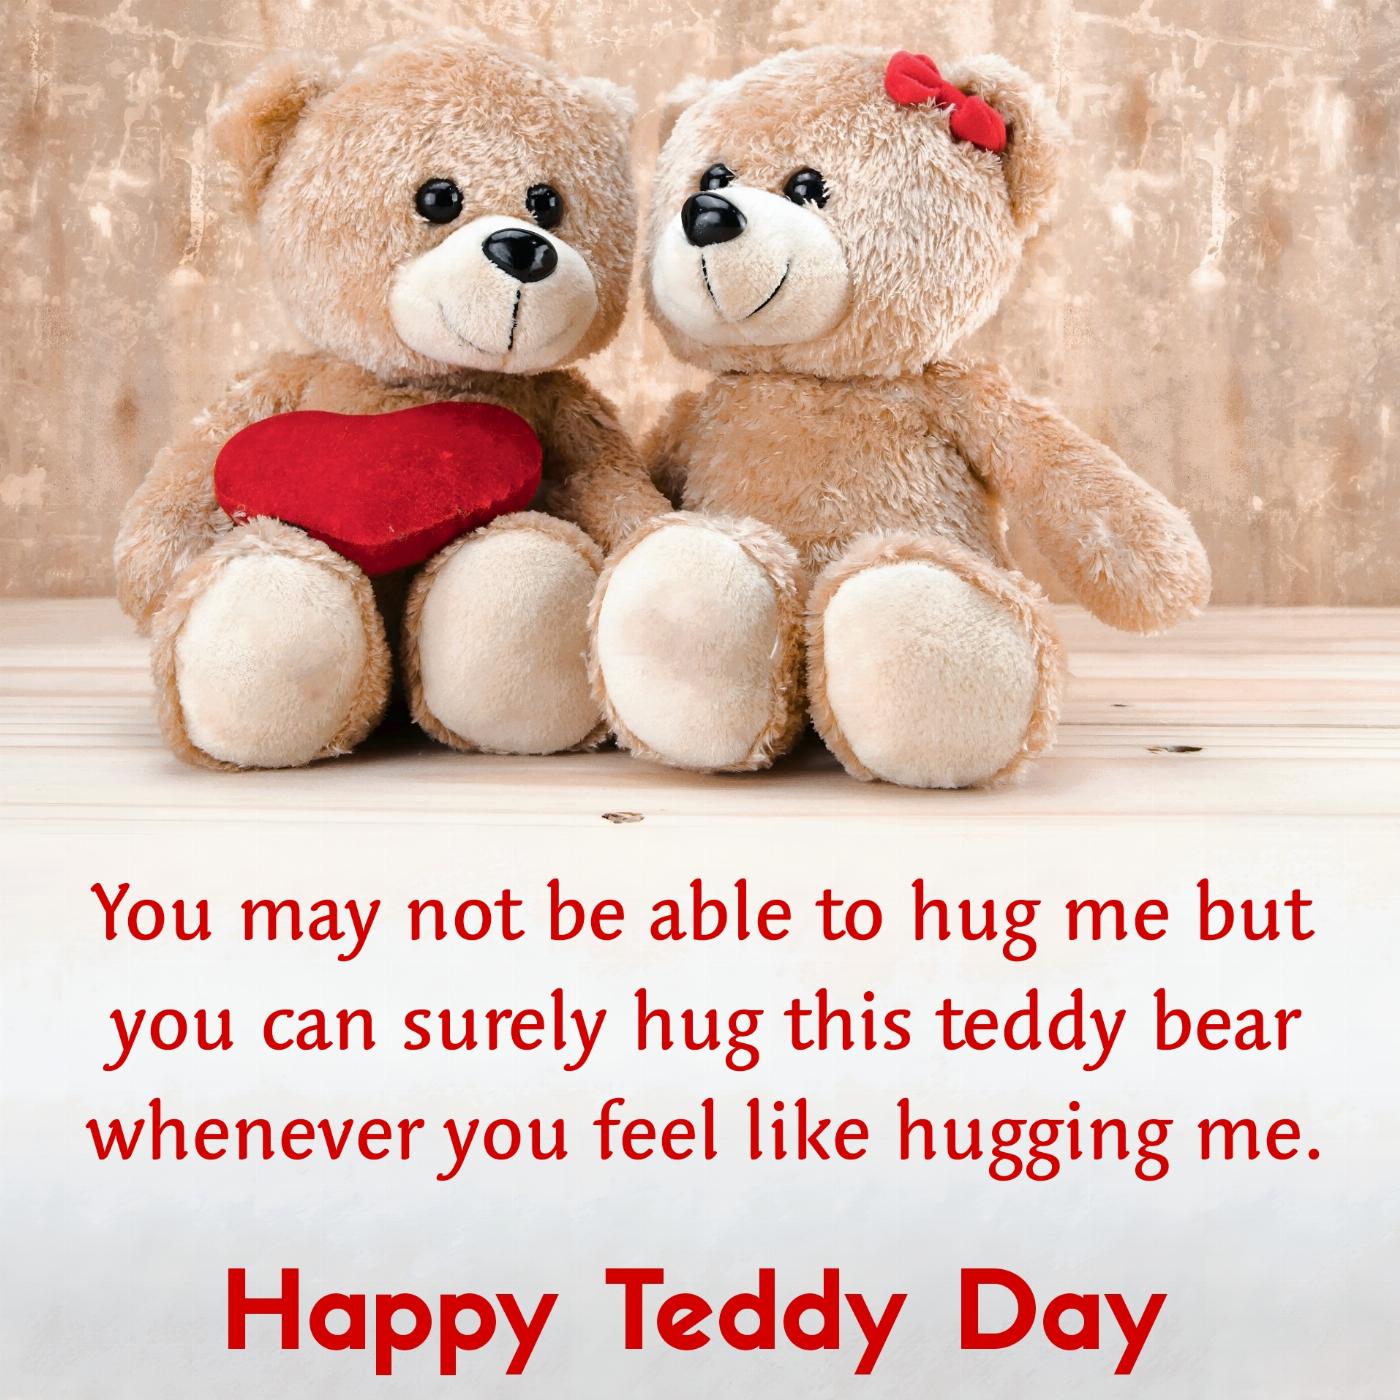 You may not be able to hug me but you can surely hug this teddy